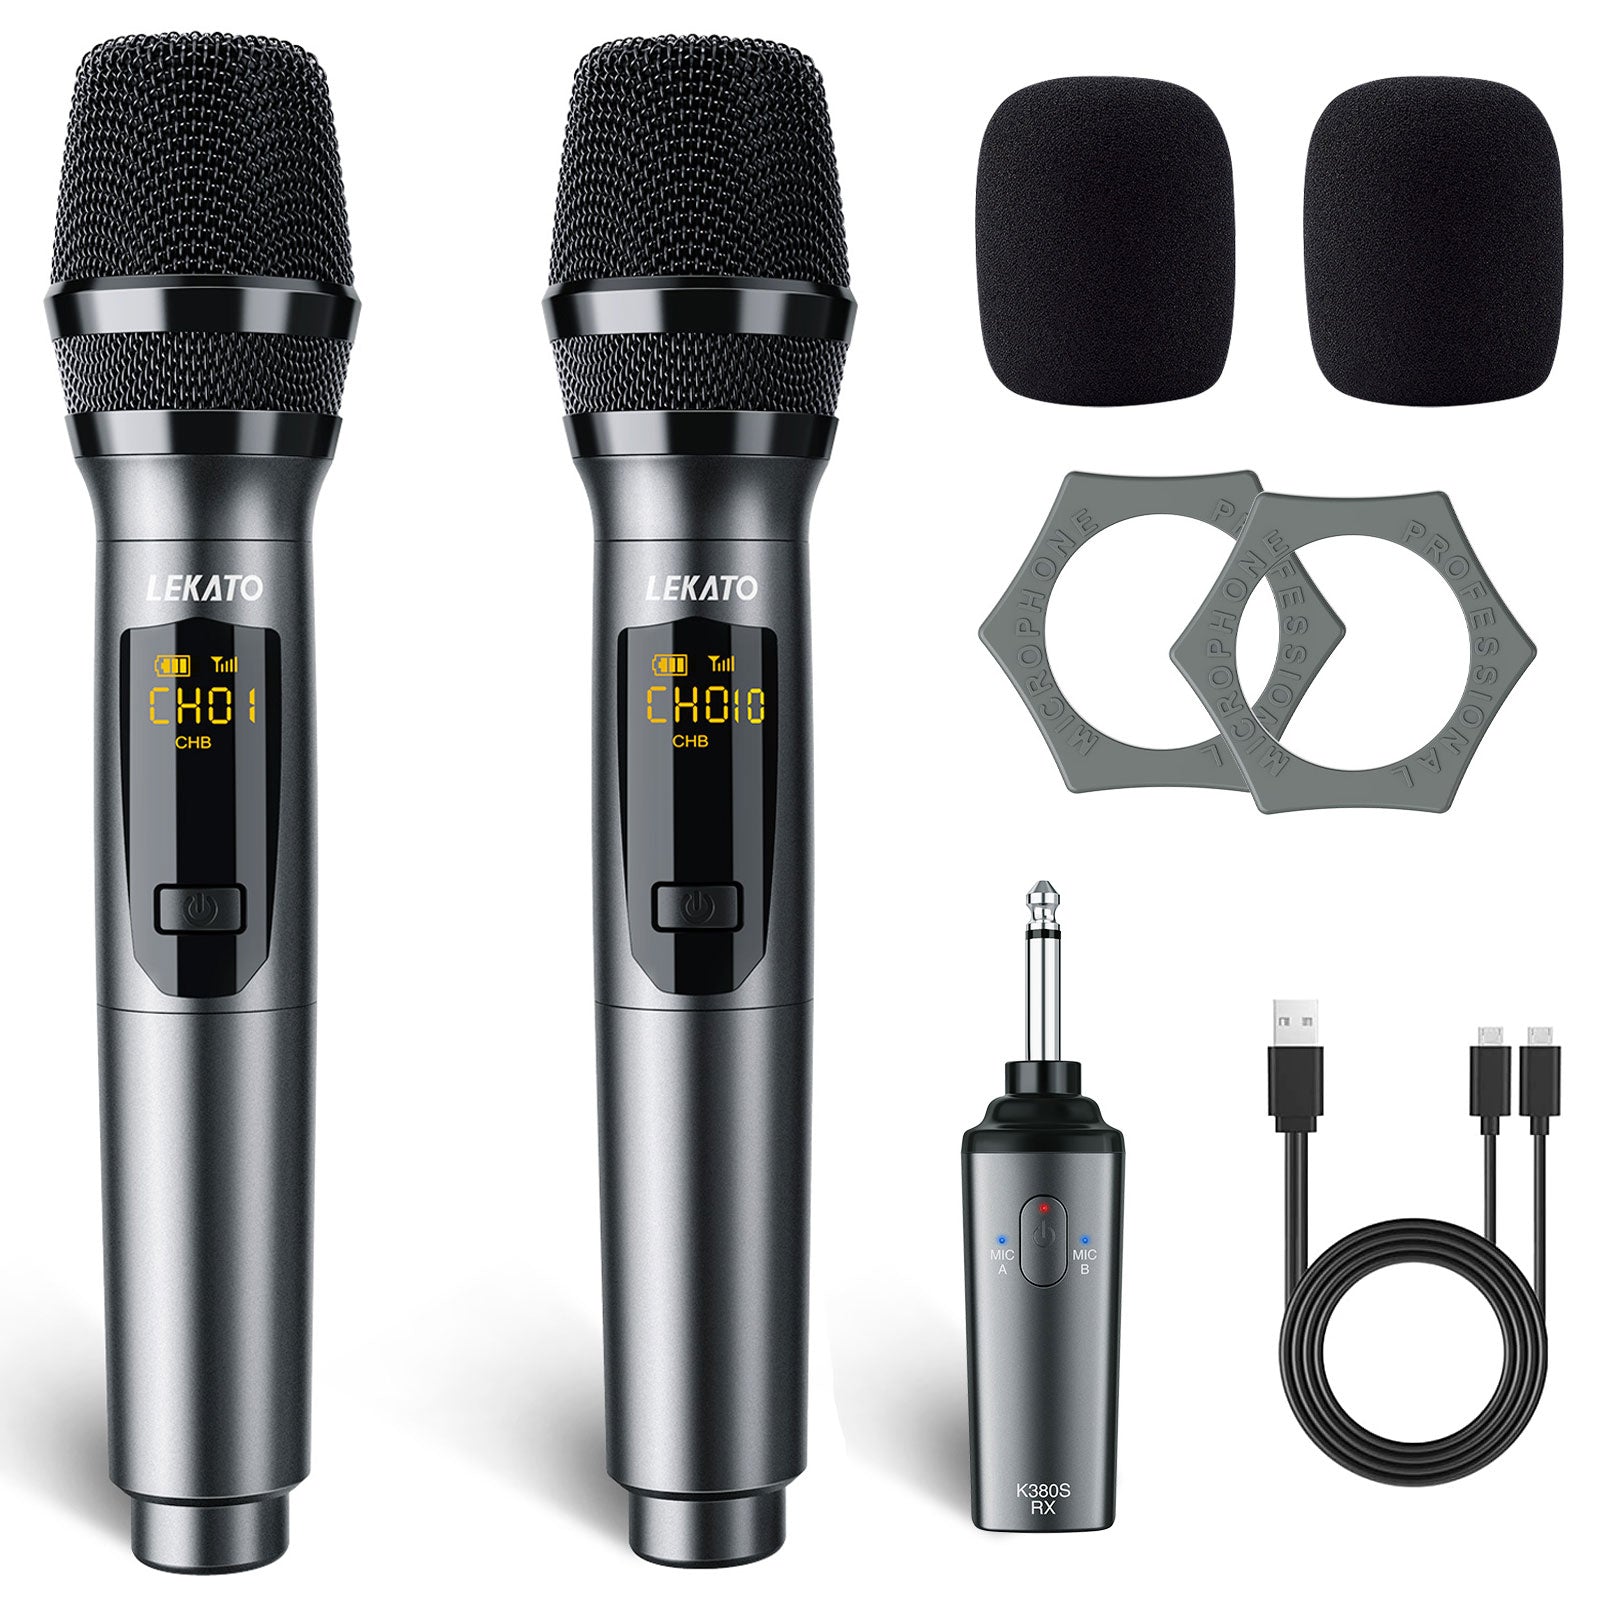 LEKATO K380S 2.4G Wireless Dual Handheld Dynamic Microphone Set 30hrs  Buy  Musical Instruments, Pedals, Wireless, Drum, Pro Audio & More - LEKATO